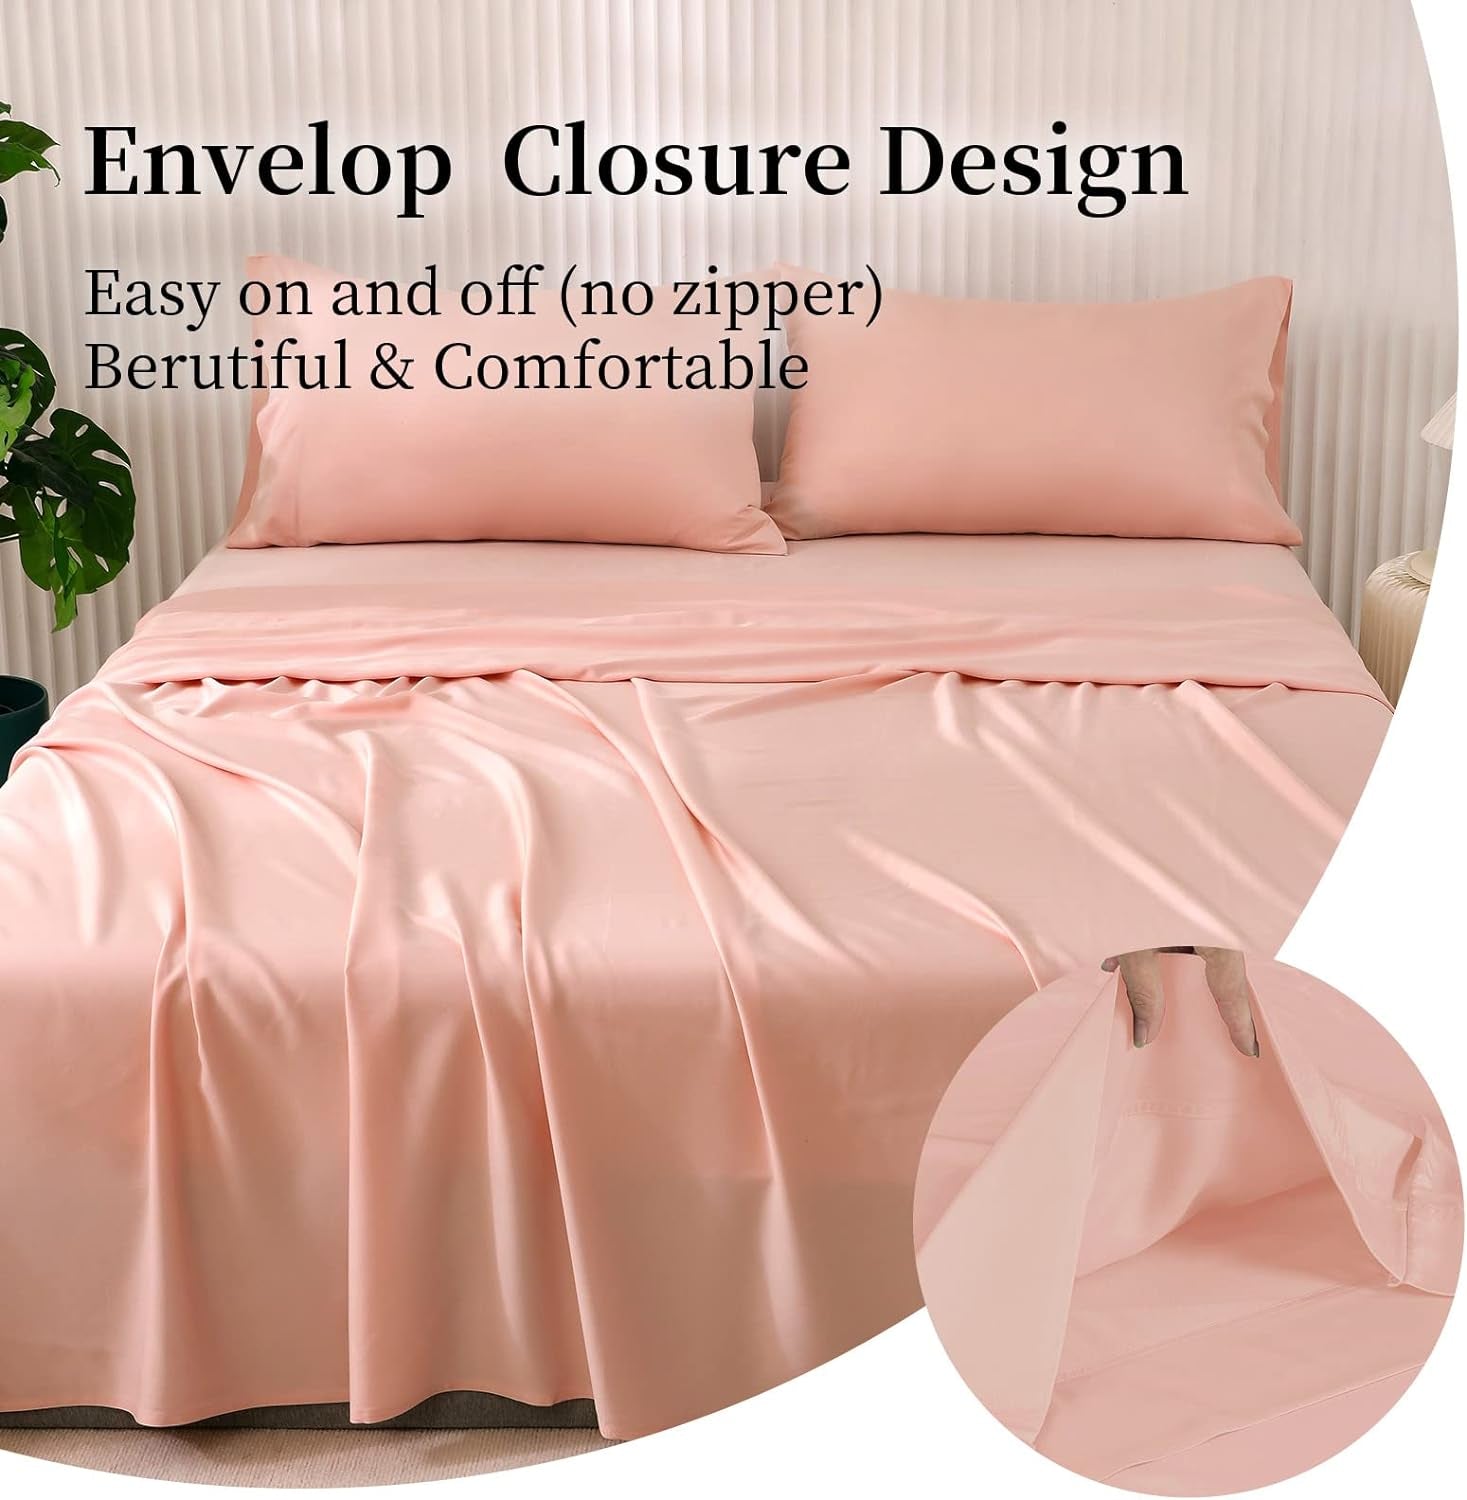 Luxury 100% Bamboo Bed Sheets Set, Full Size Cooling Sheets with Fitted Deep Pocket, Silky Soft and Comfortable for Home and Hotel, 4 Piece, Pink